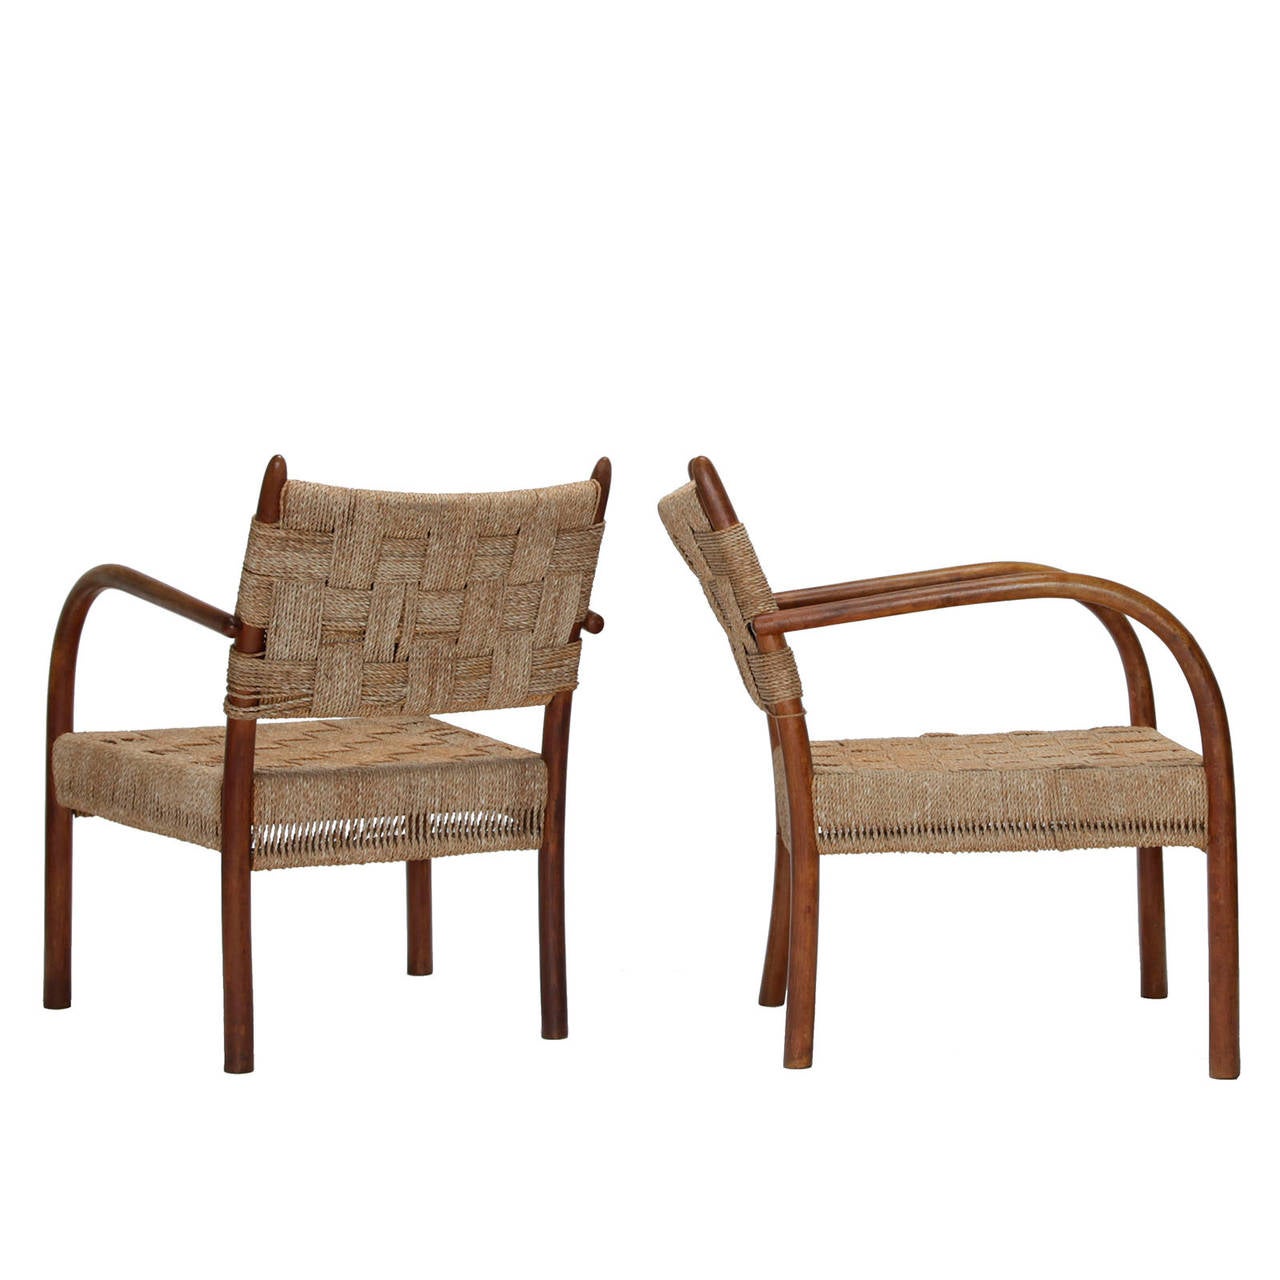 A pair of armchairs in beech with seagrass cord. Designed by Fritz Schlegel, circa 1930. Made by Fritz Hansen, Denmark.